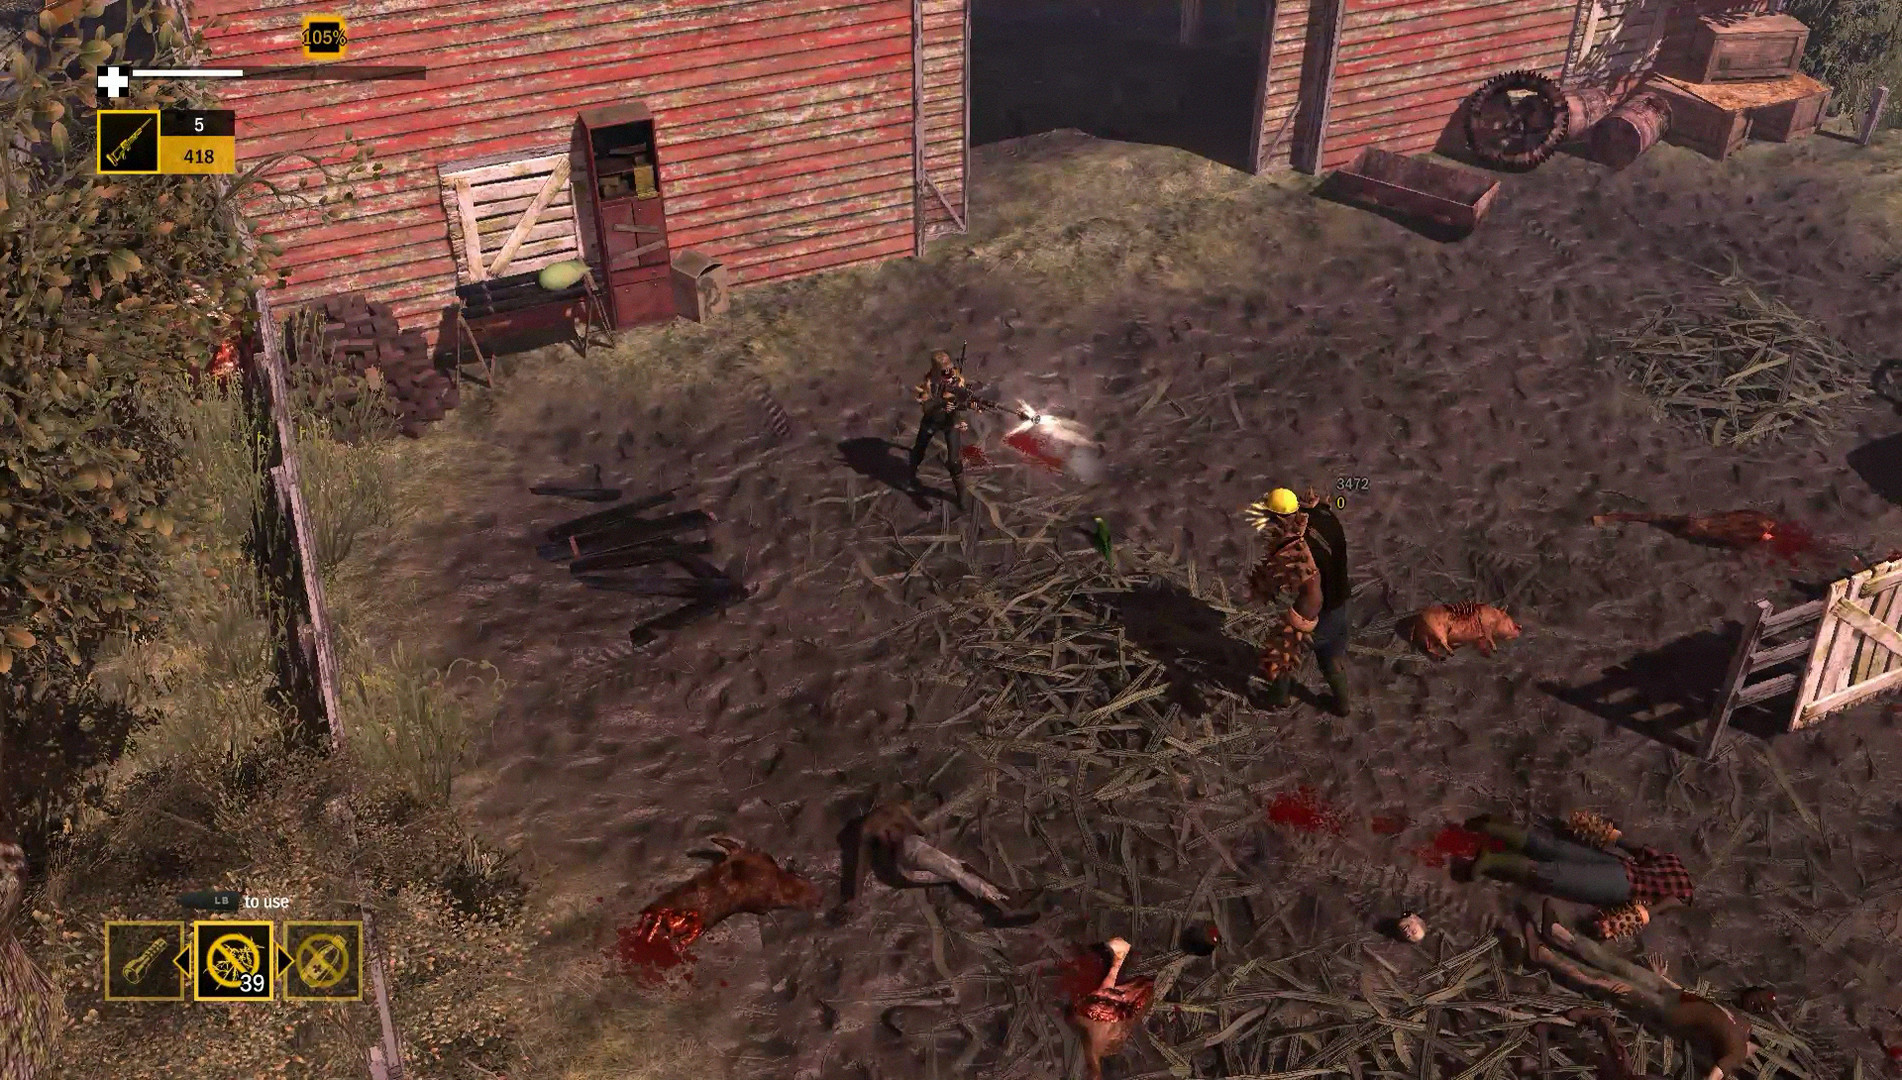 How To Survive 2 - Dead Dynamite Featured Screenshot #1